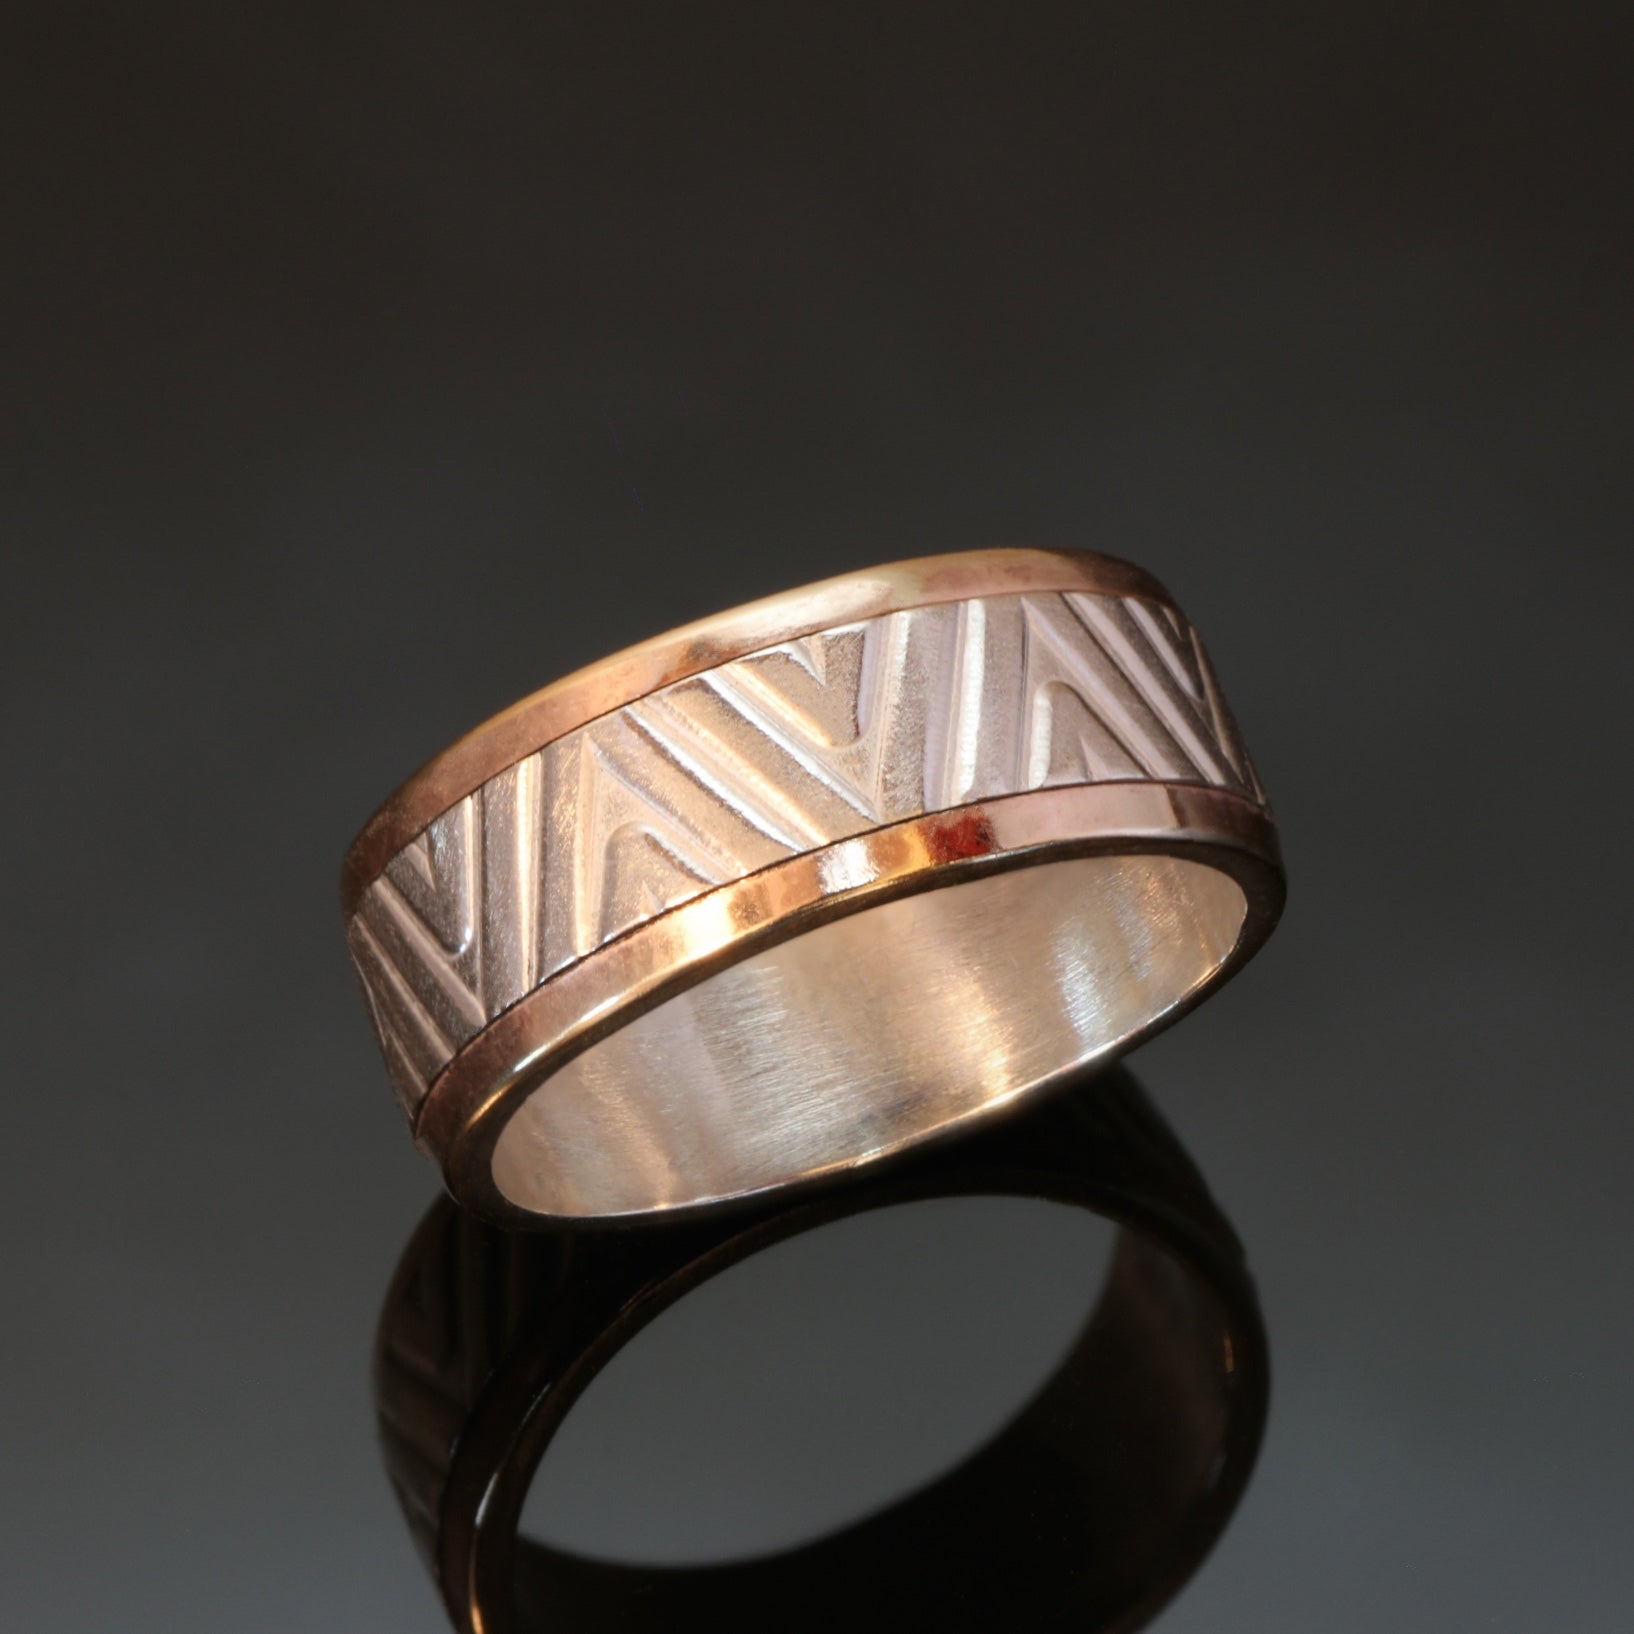 silver ring with zigzag pattern embossed and gold rails on the outside edges of the band